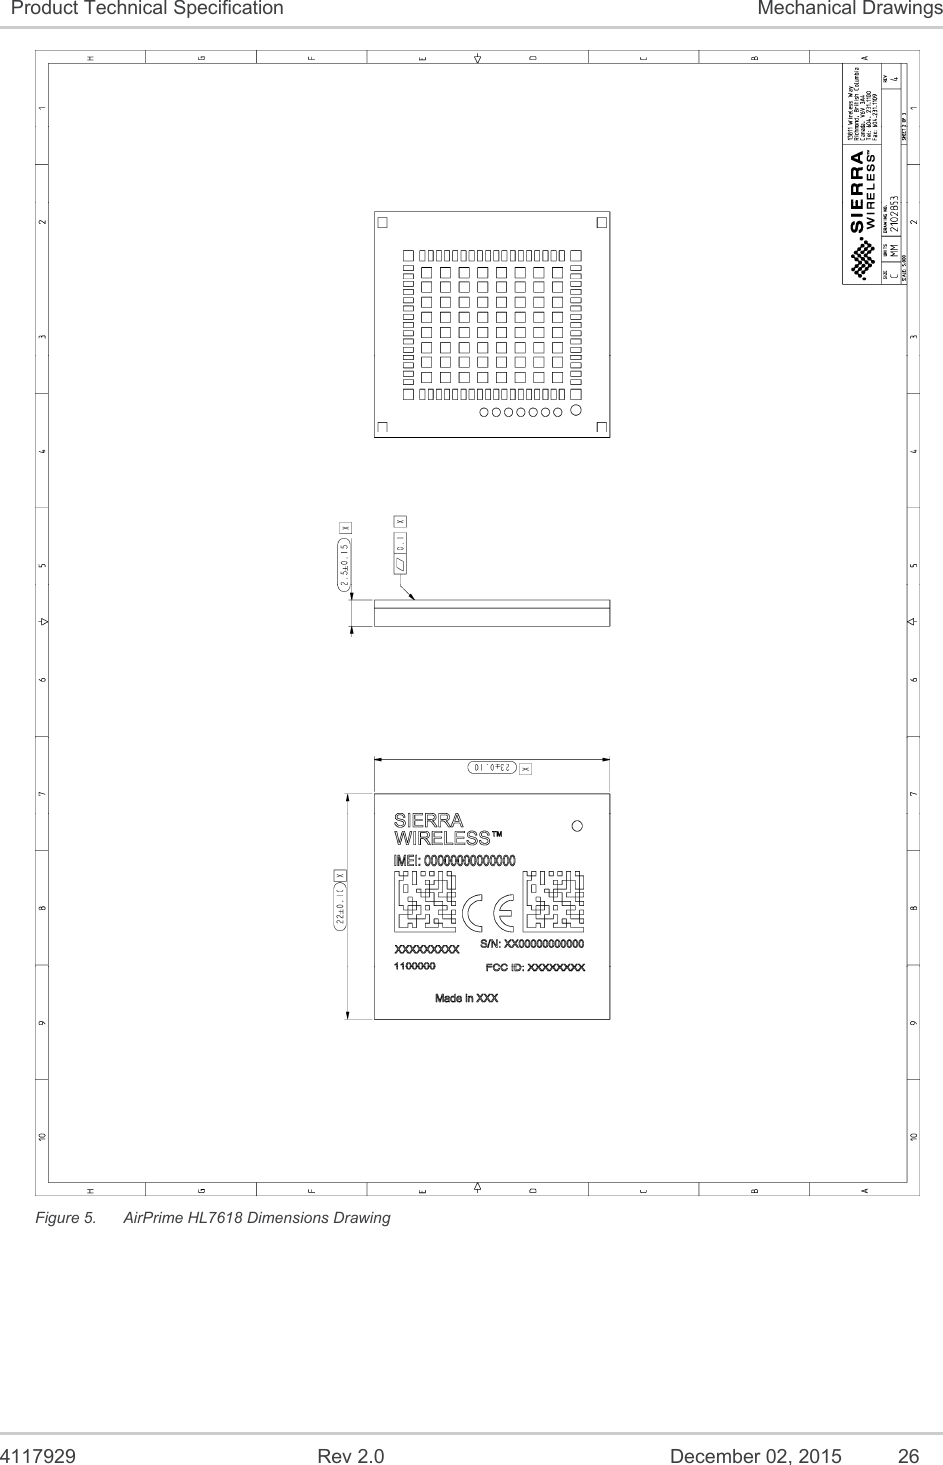  4117929  Rev 2.0  December 02, 2015  26 Product Technical Specification  Mechanical Drawings  Figure 5.  AirPrime HL7618 Dimensions Drawing 